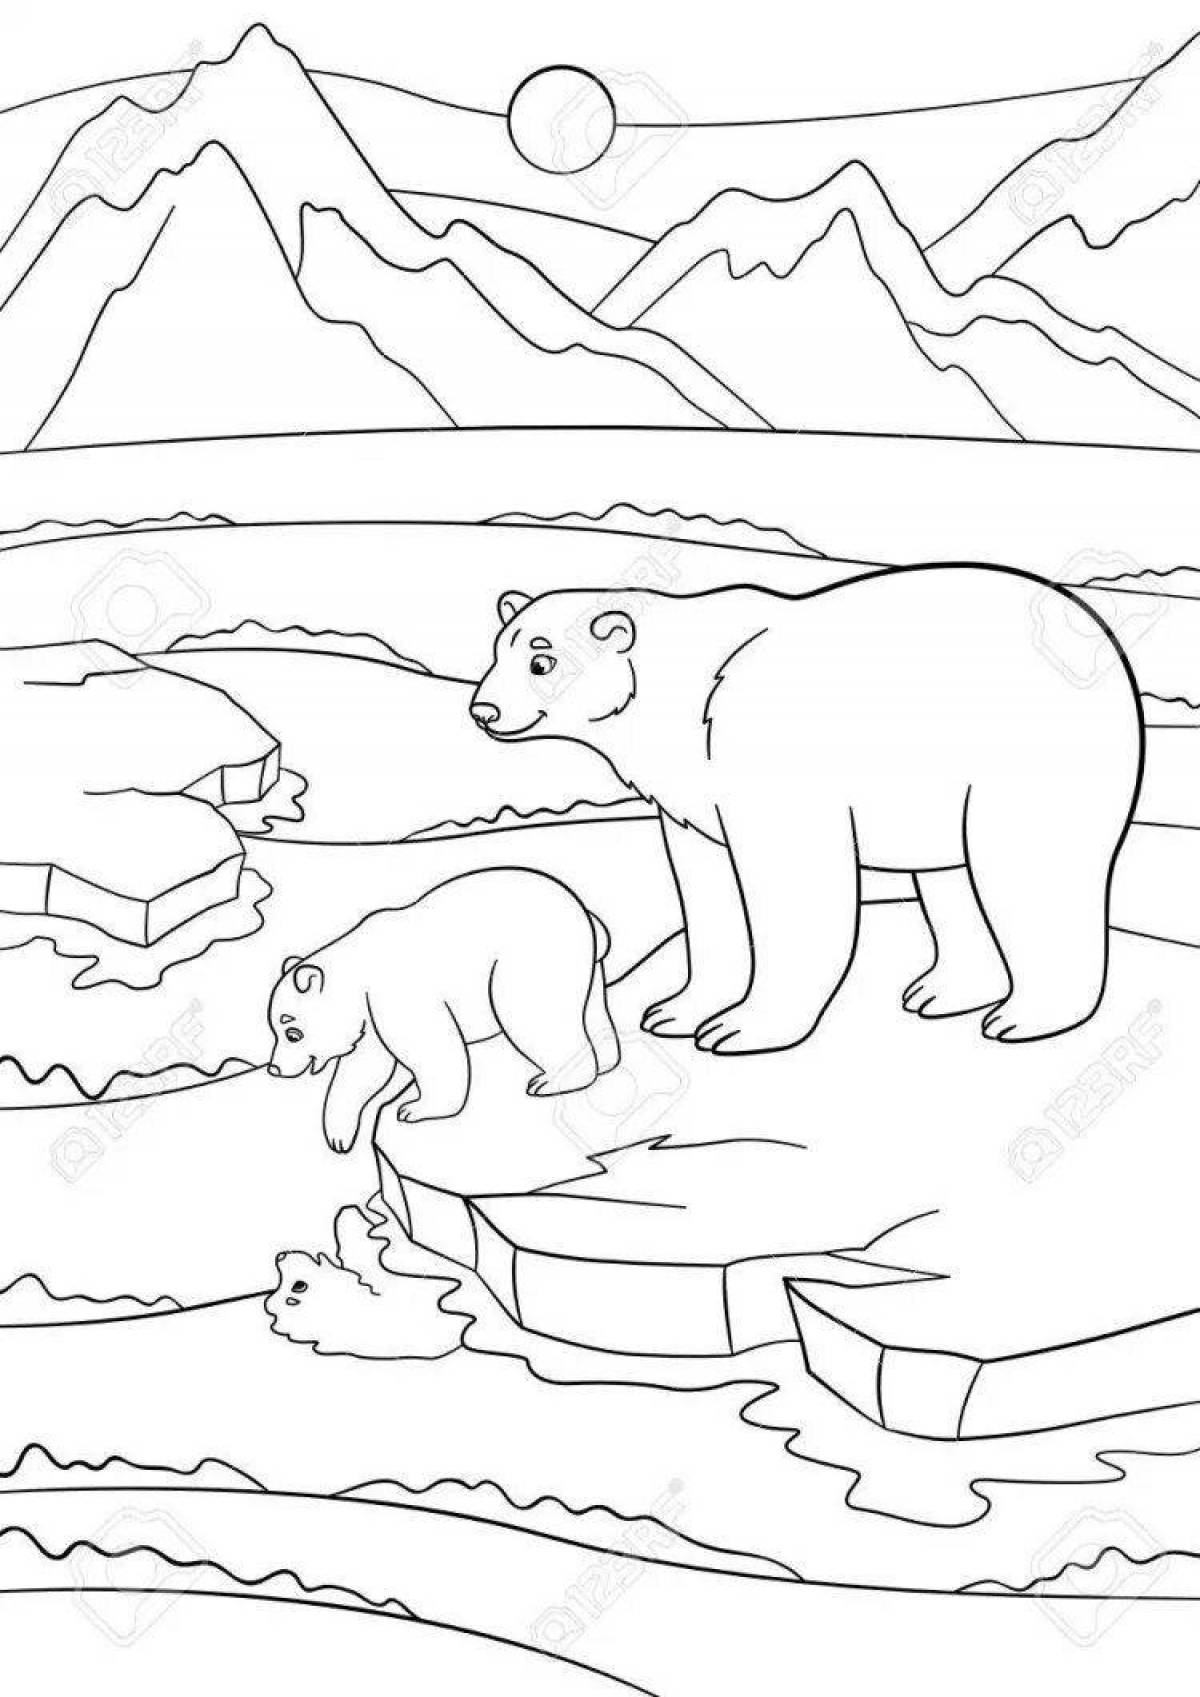 Coloring book magical north pole for kids